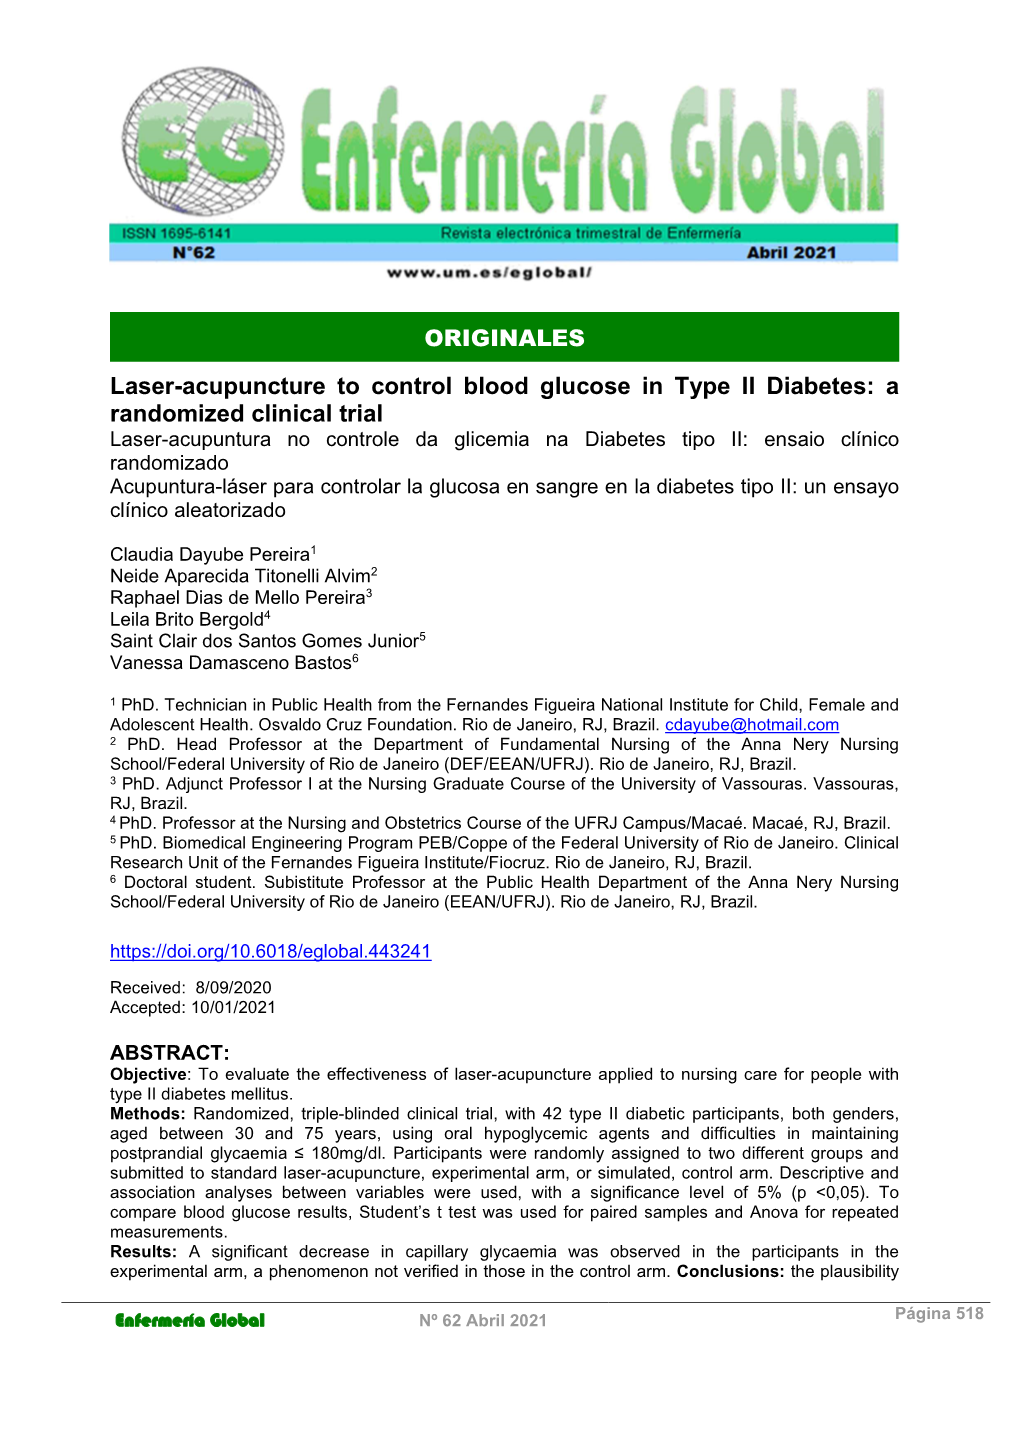 Laser-Acupuncture to Control Blood Glucose in Type II Diabetes: A